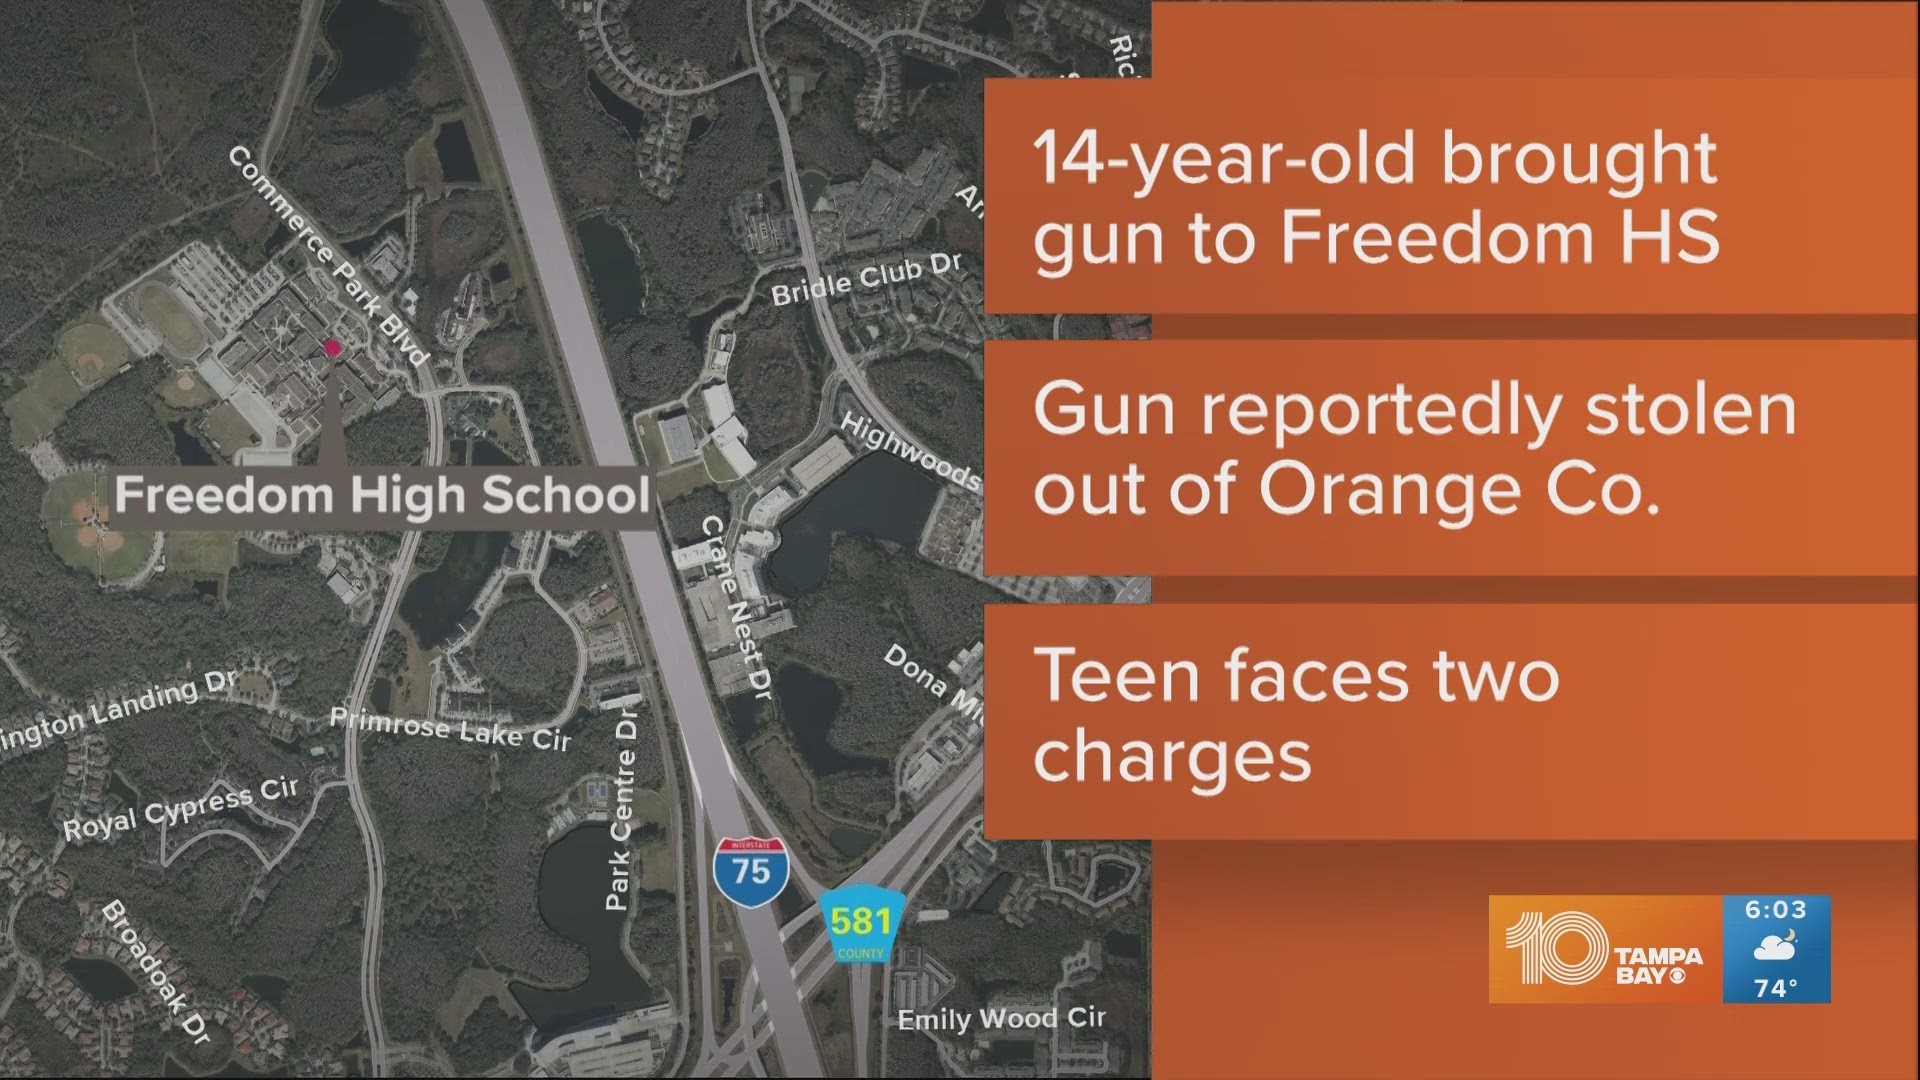 The 14-year-old had a loaded 9 millimeter gun in his book bag. The gun had been reported stolen.